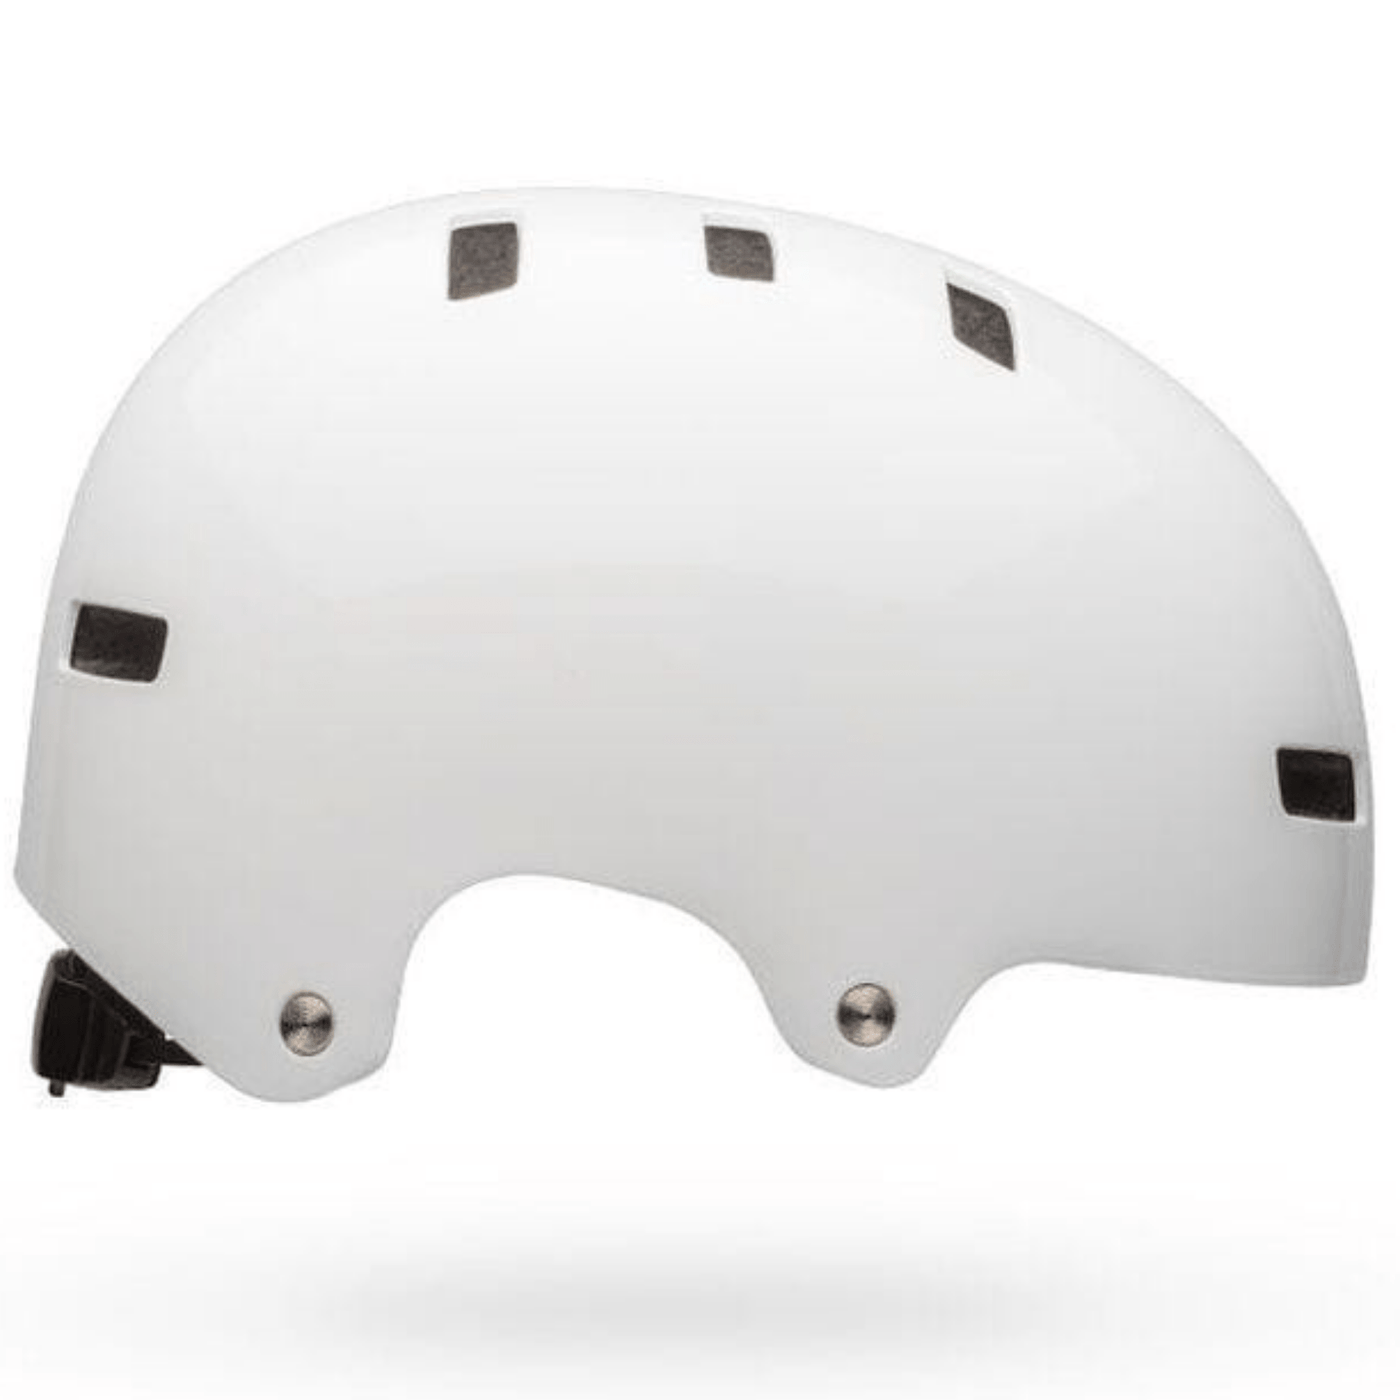 Bell Youth Helmet Span - Gloss White 8Lines Shop - Fast Shipping